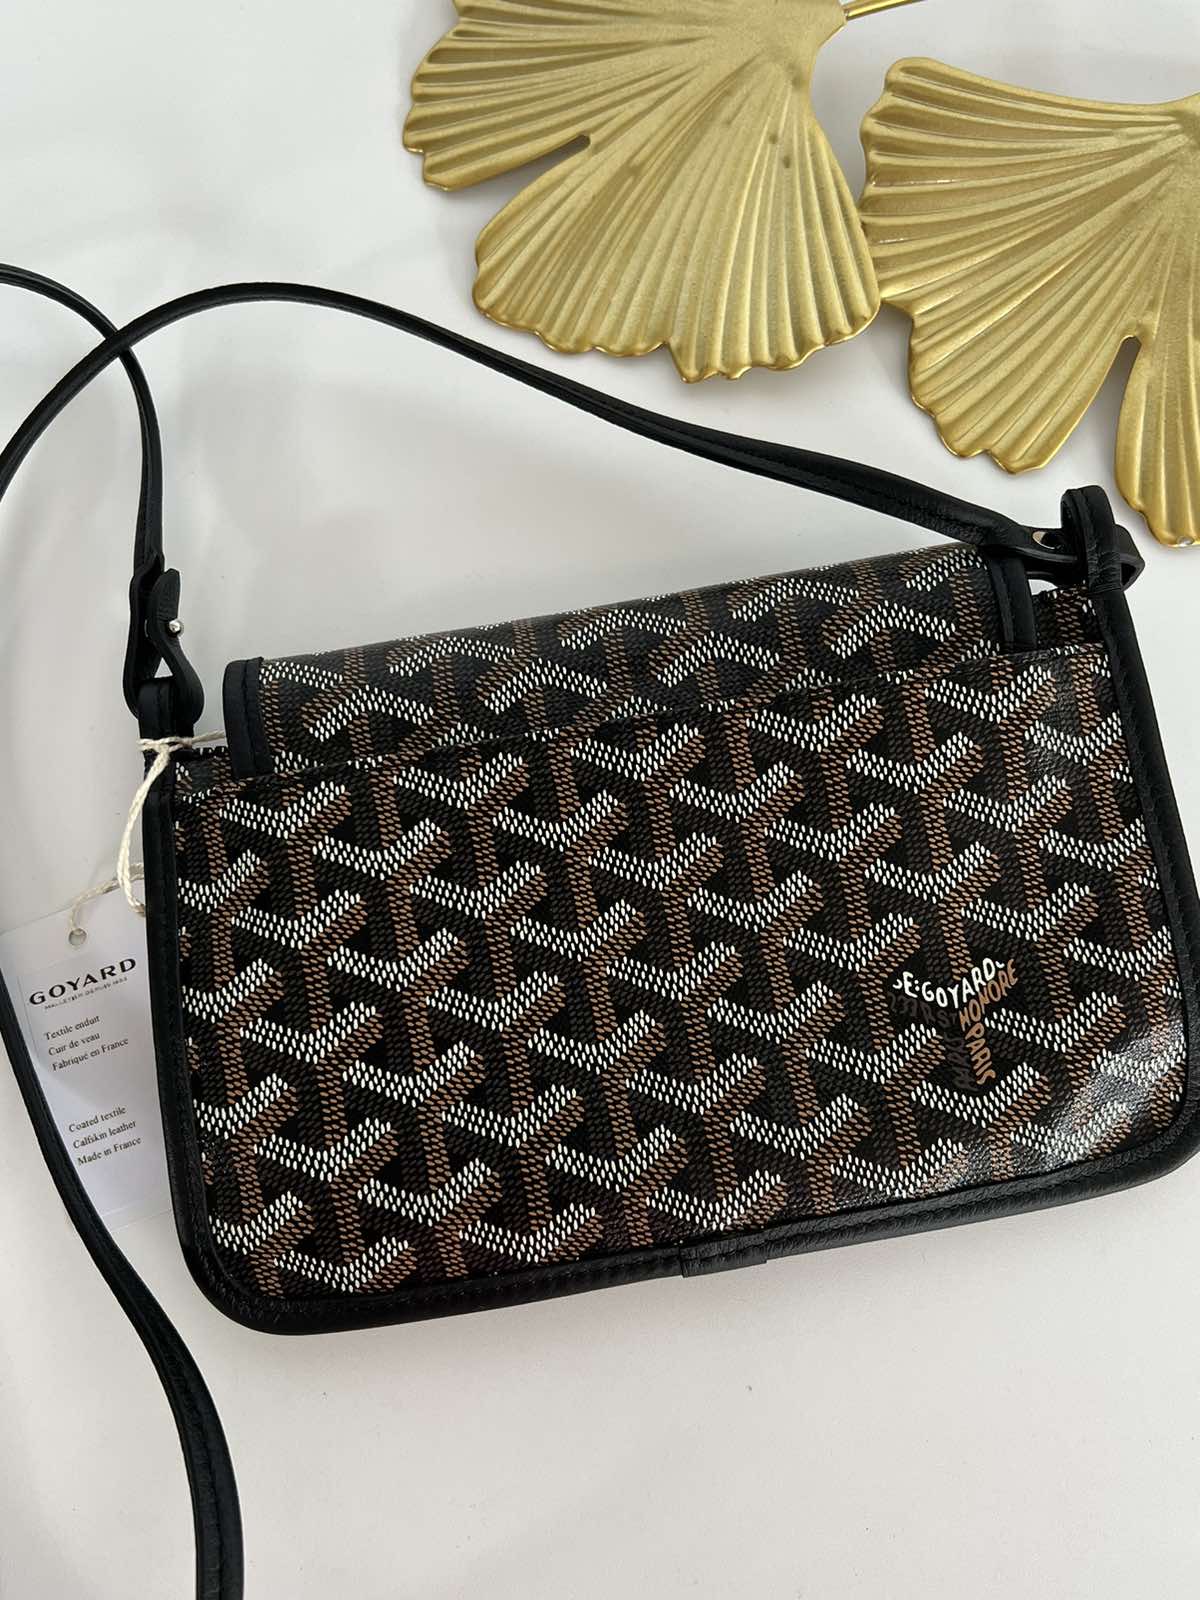 Goyard Black Plumet Wallet Clutch/Crossbody Bag. Made in France. With care  card, dustbag & certificate of authenticity from ENTRUPY ❤️ - Canon E-Bags  Prime